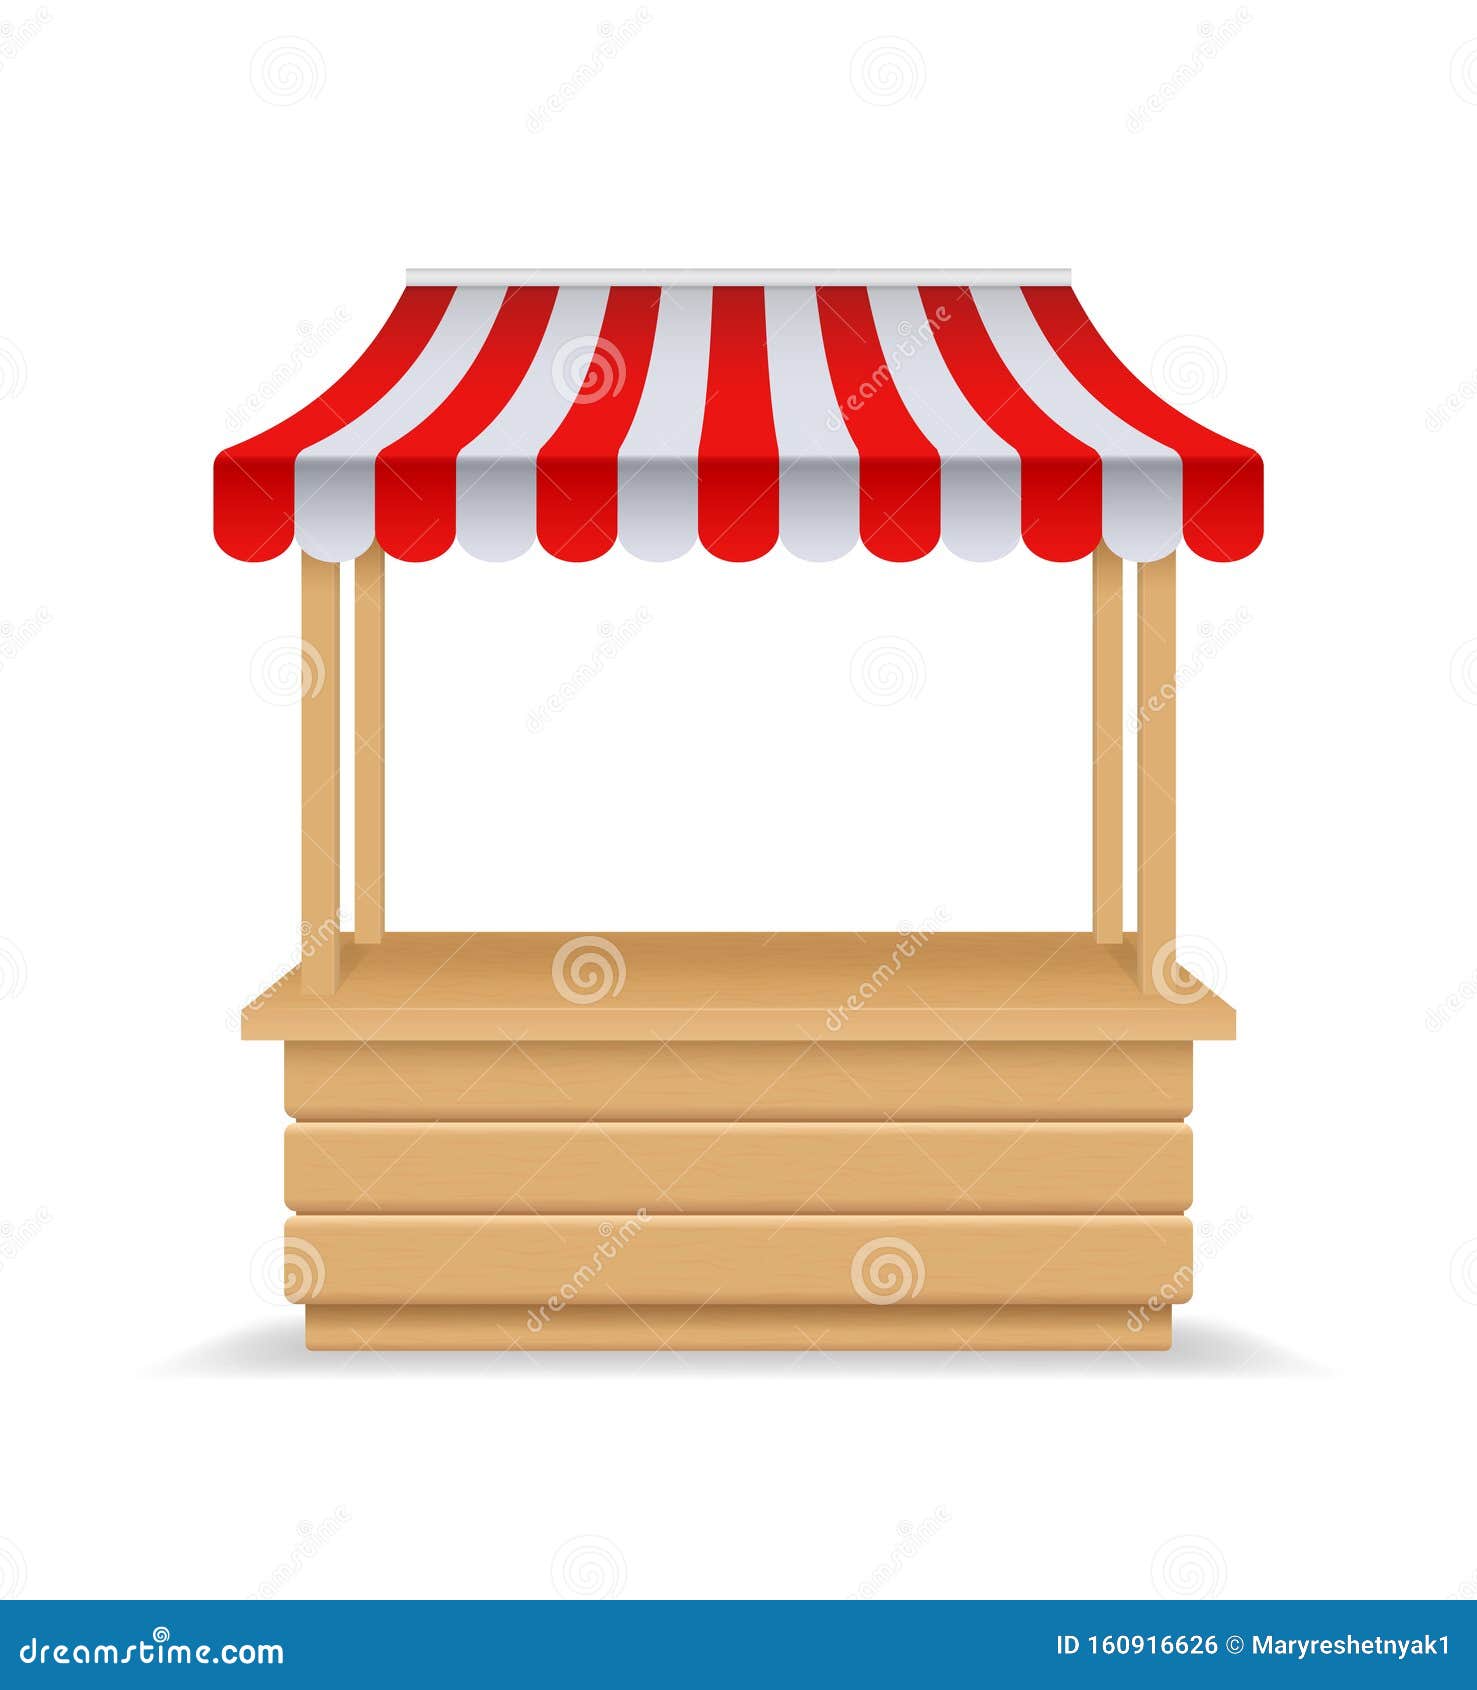 Wooden Market Stall Fair Booth 3d Empty Kiosk With Striped